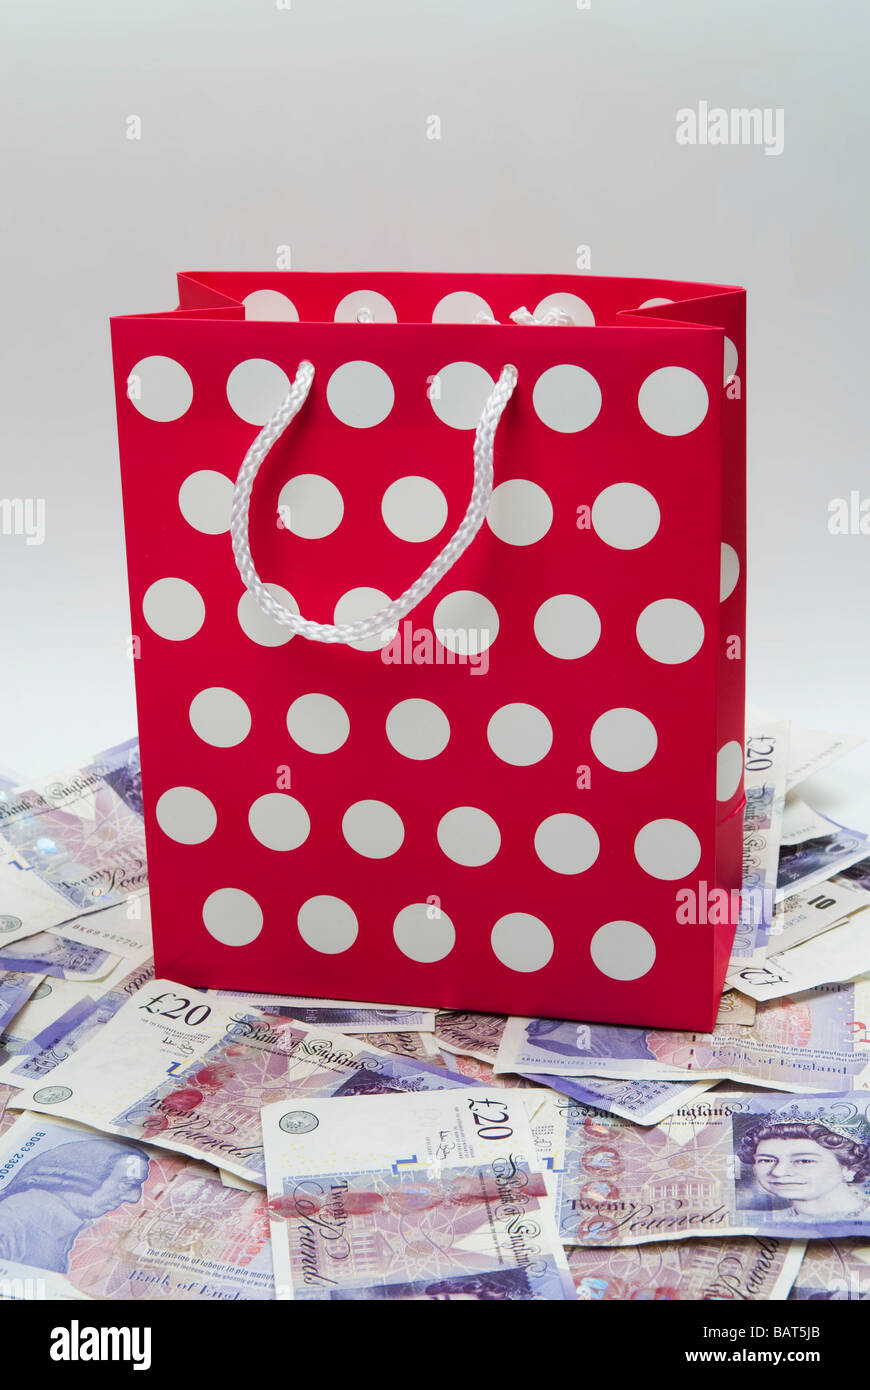 Shopping bag of a pile of British money Stock Photo